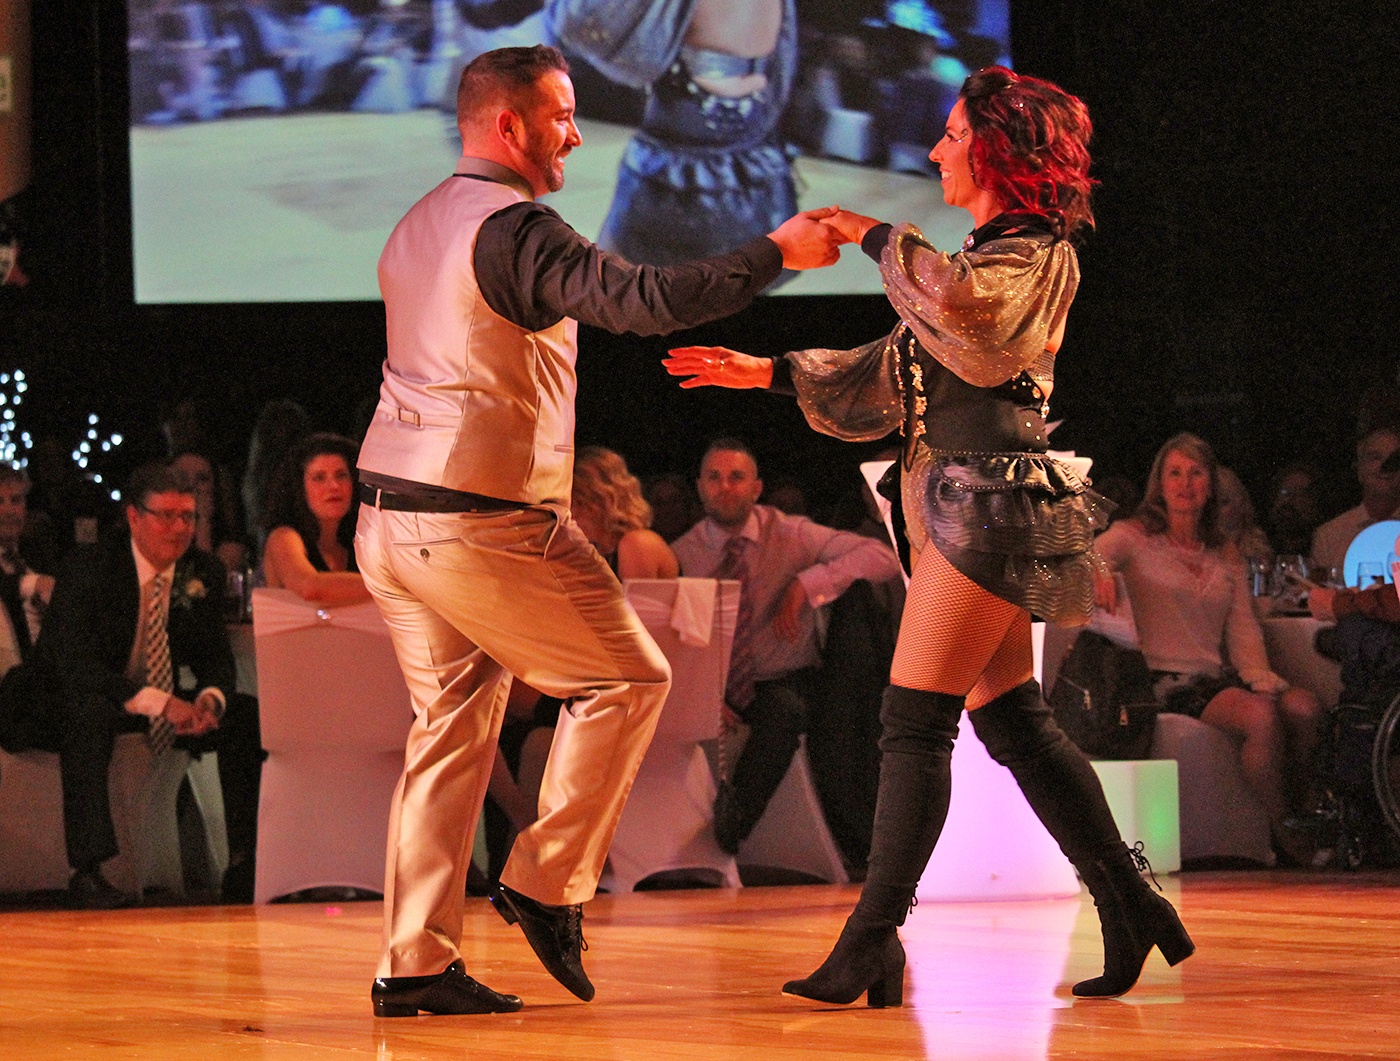 DANCE OFF - Brett Speight and Sherri Ryckman hit the dance floor at the Sheraton Celebrity Dance Off earlier this month.